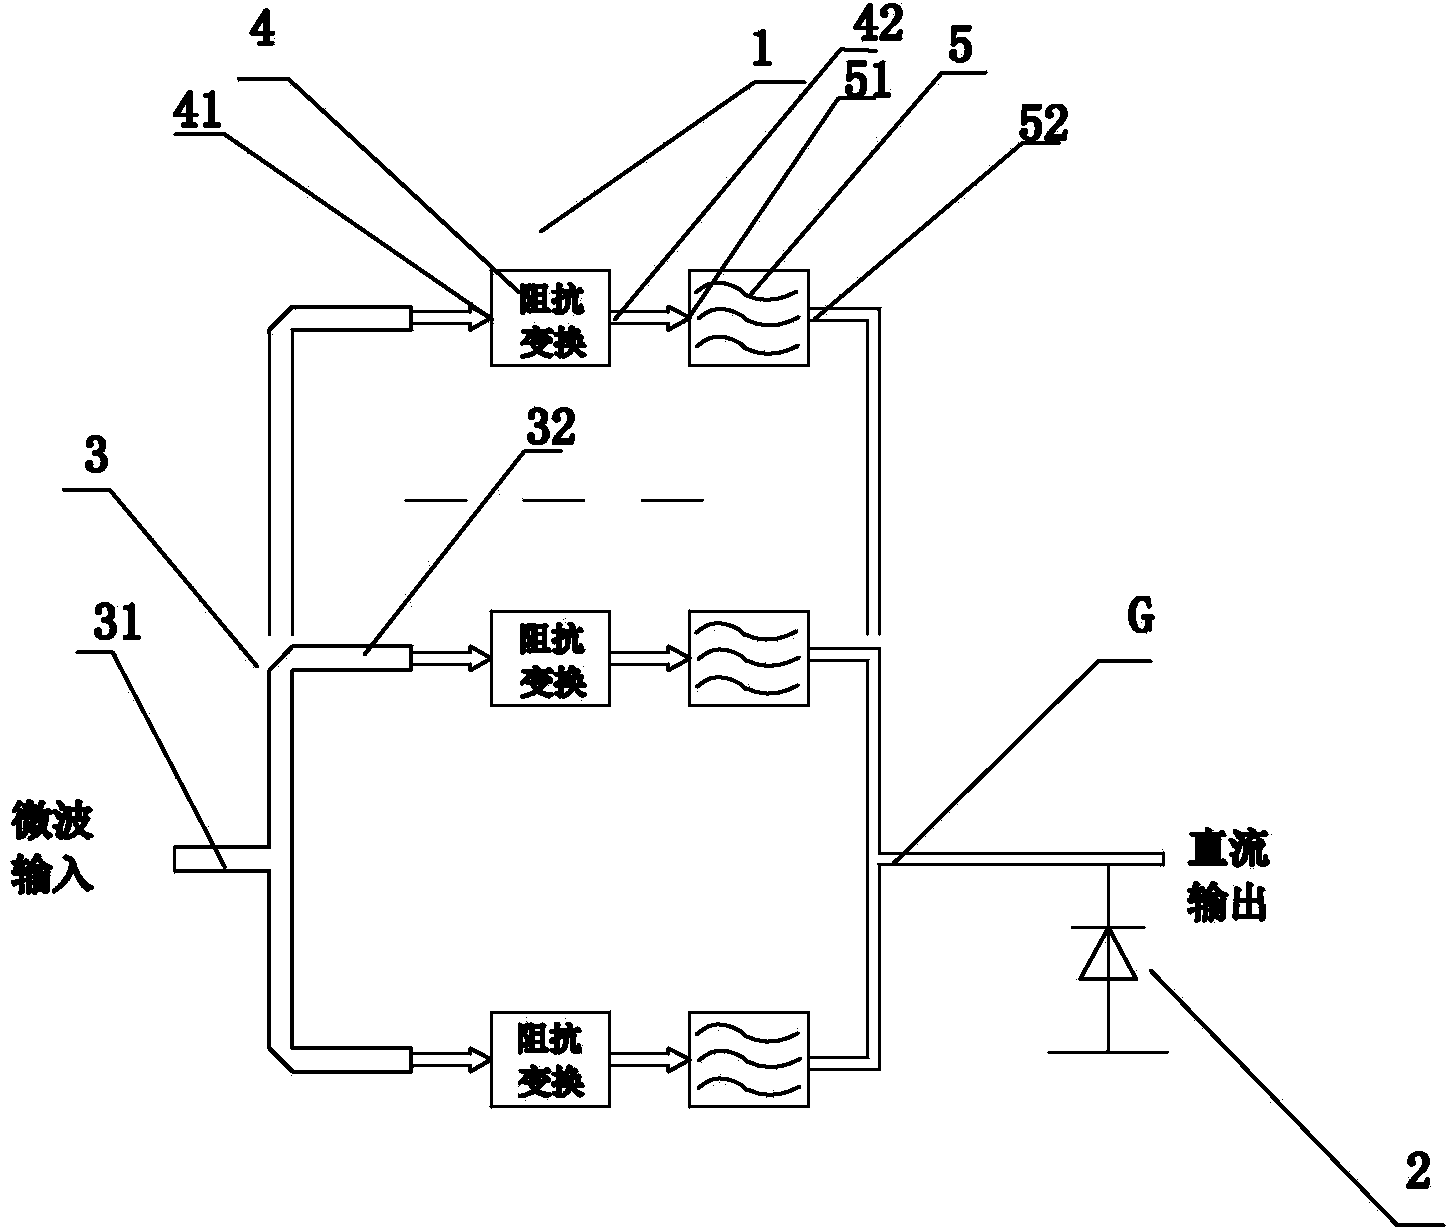 Multifrequency microwave rectifier circuit